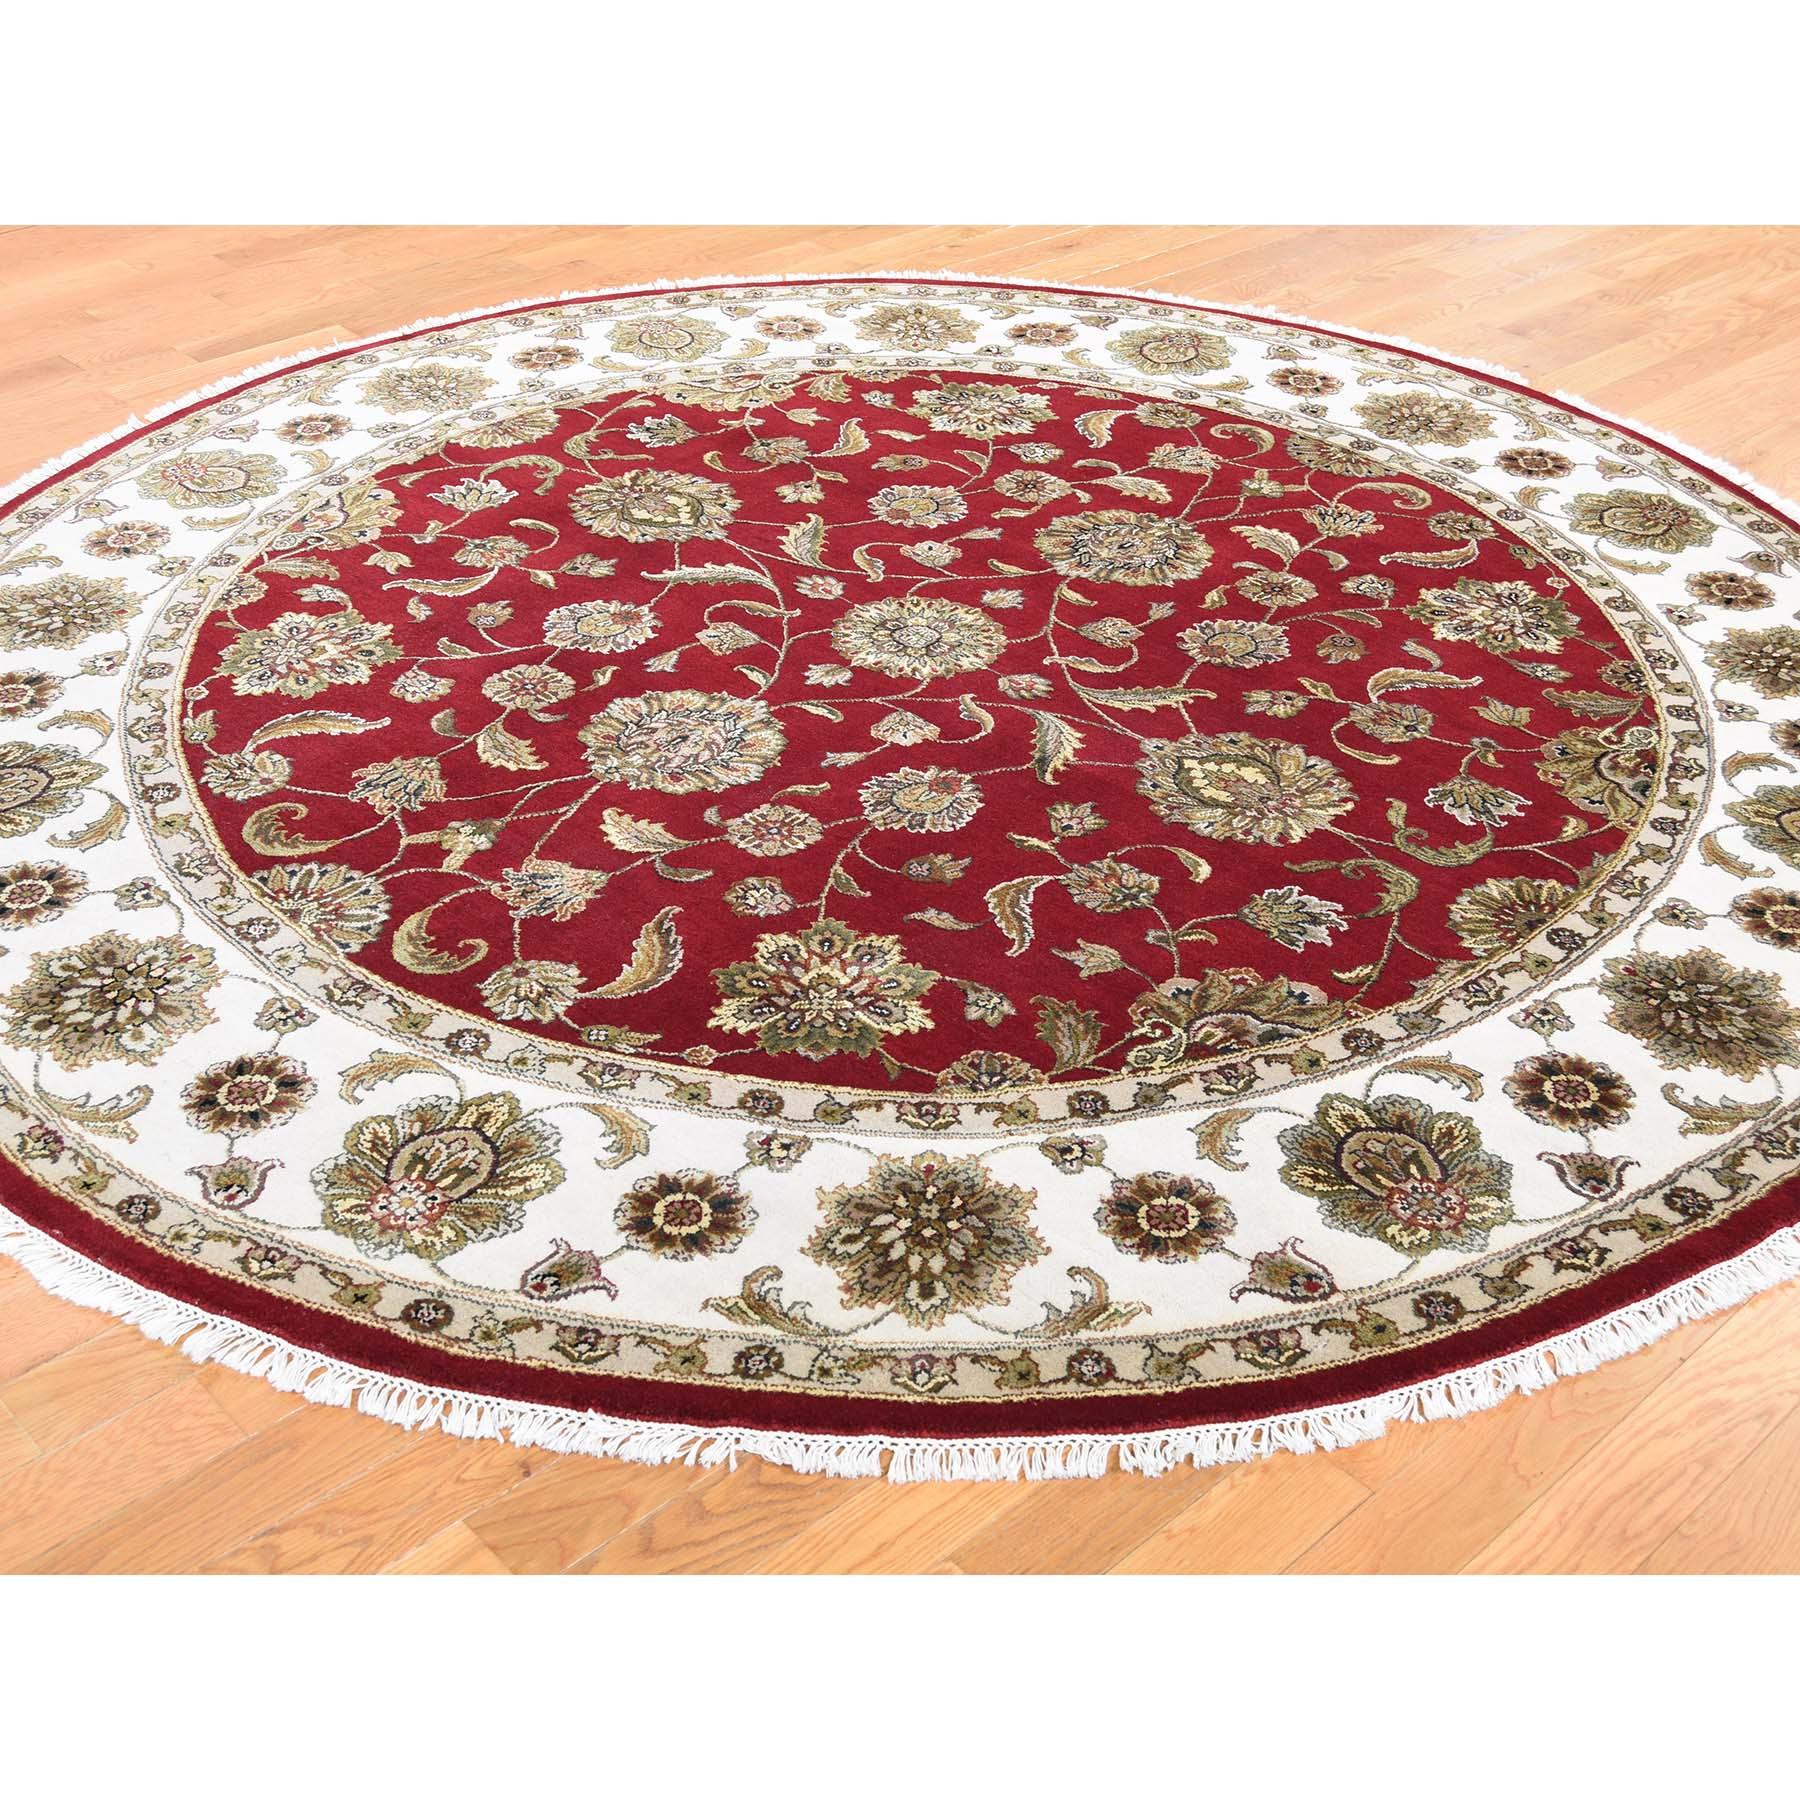 Afghan Round Wool and Silk Red Rajasthan Hand Knotted Oriental Rug